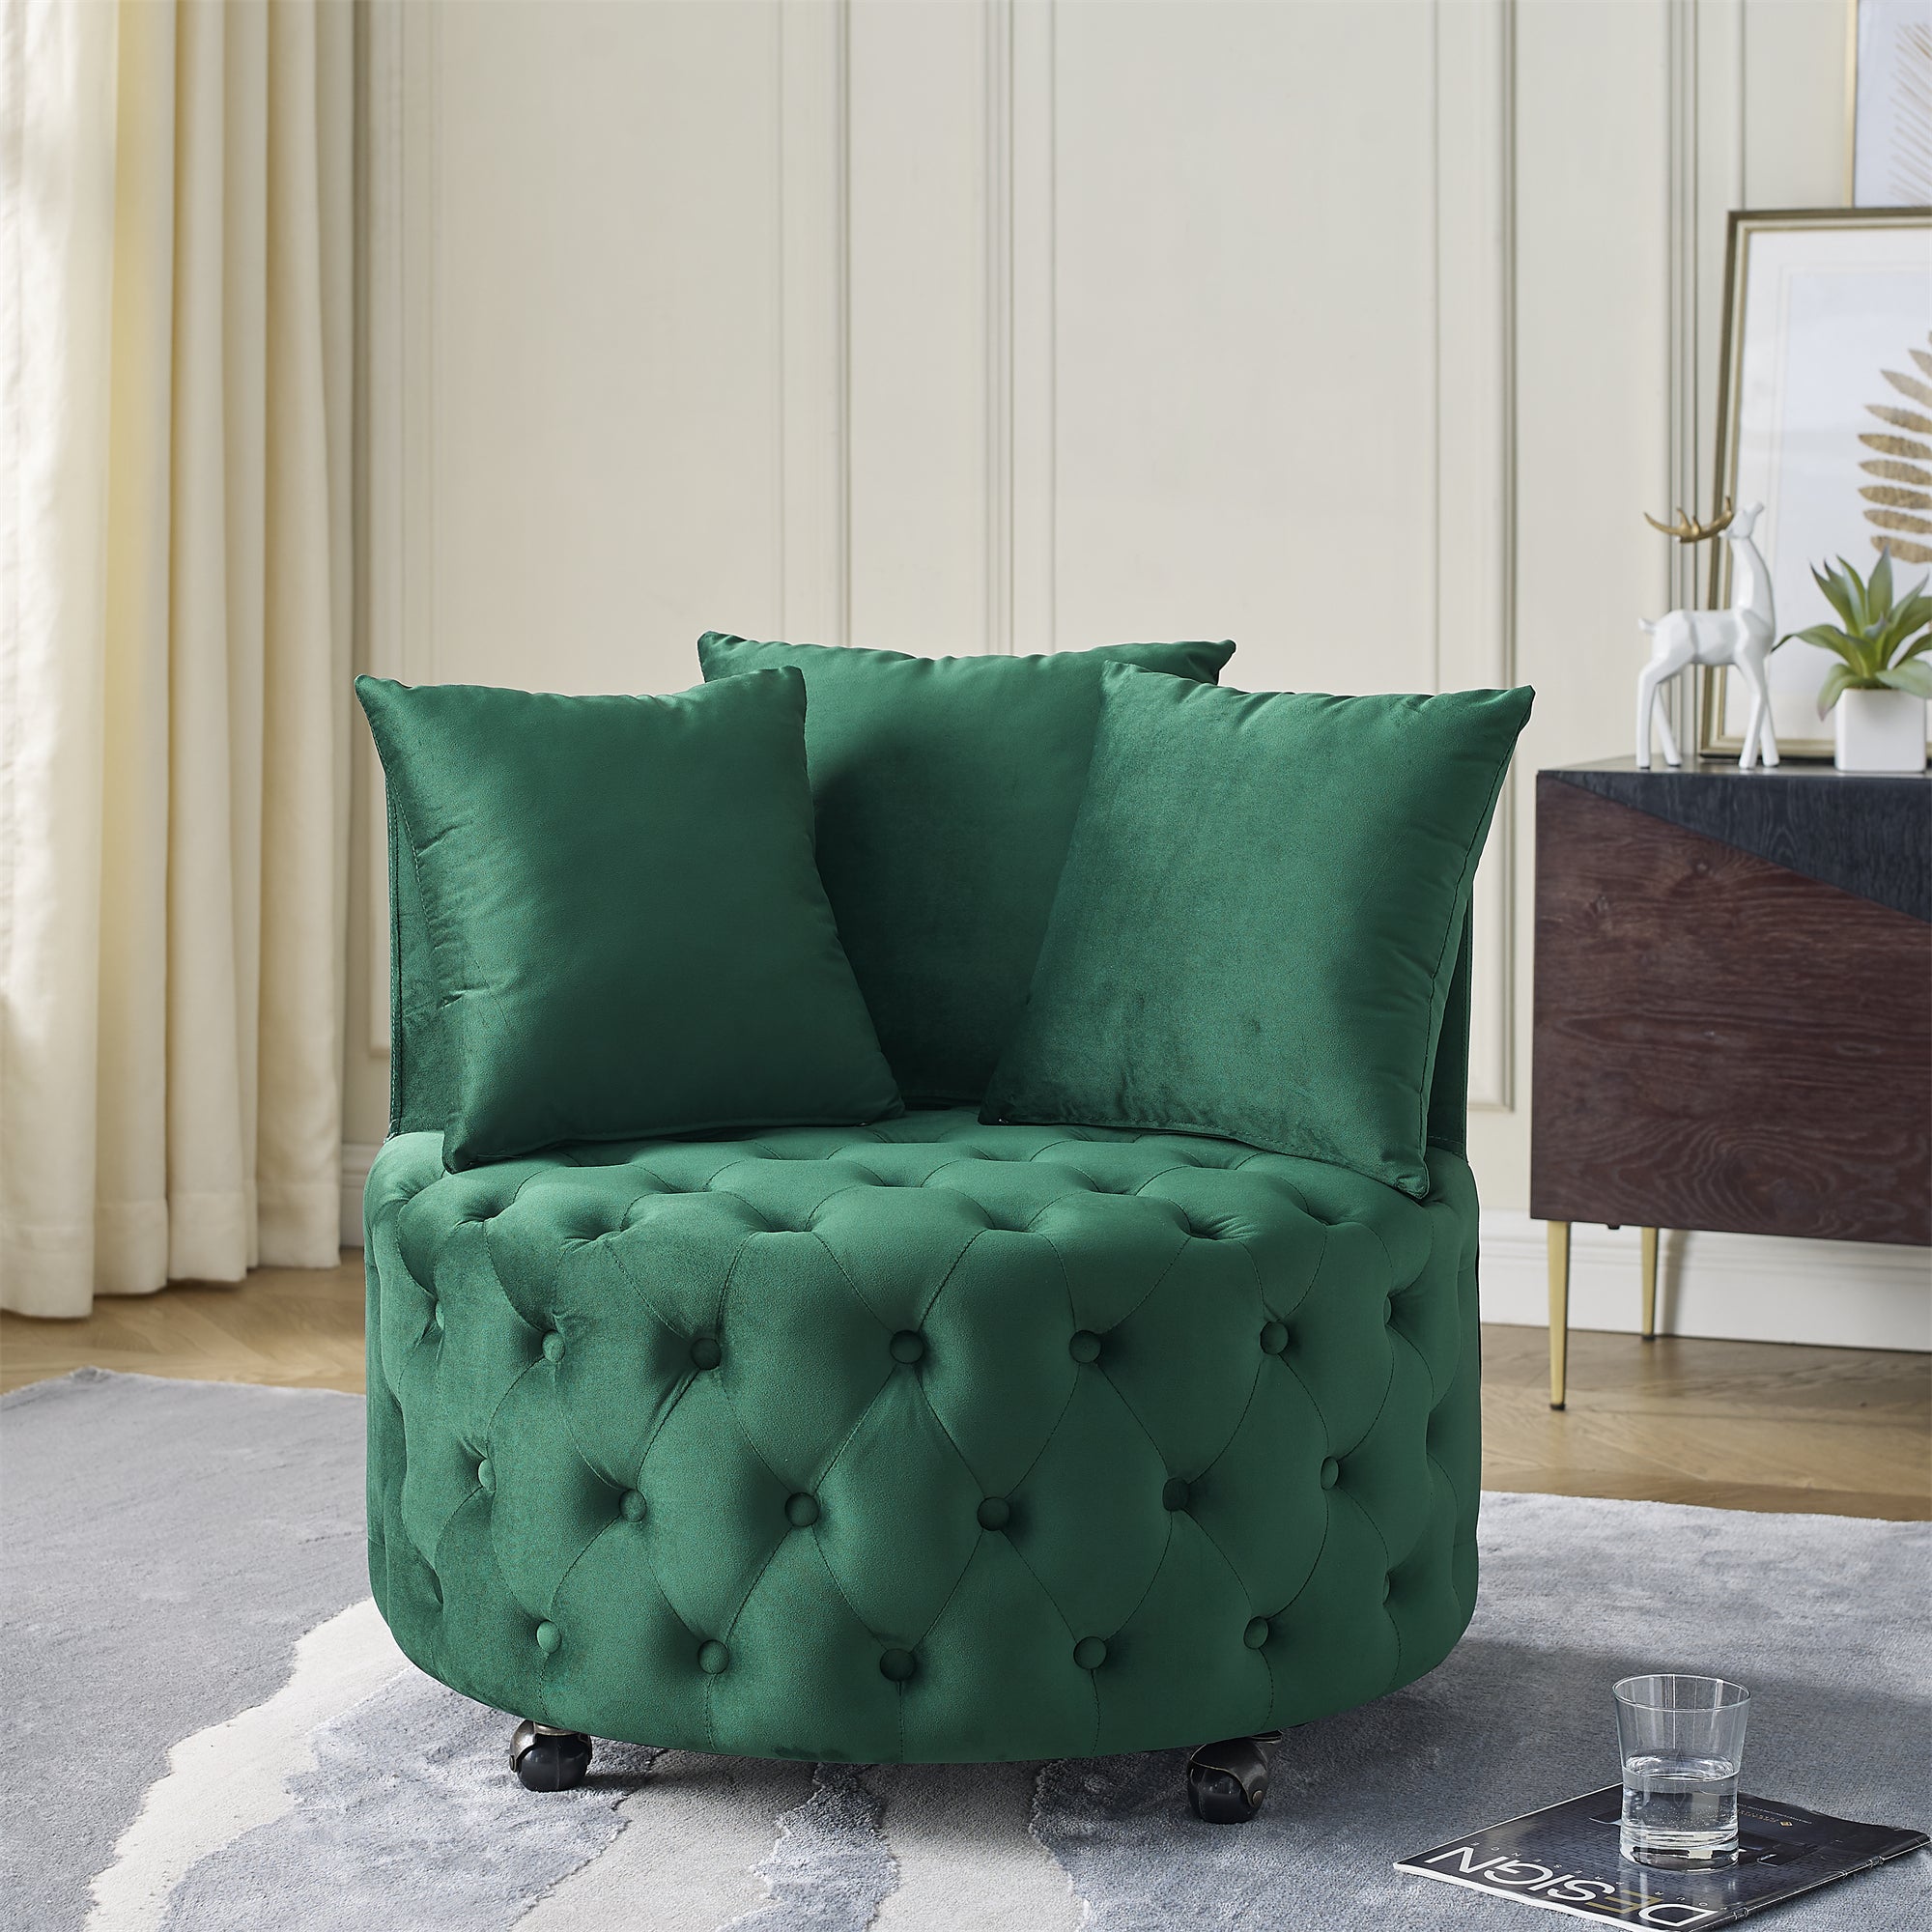 Cecilia green Velvet Tufted Seat Swivel Rolling Accent Chair with Pillows